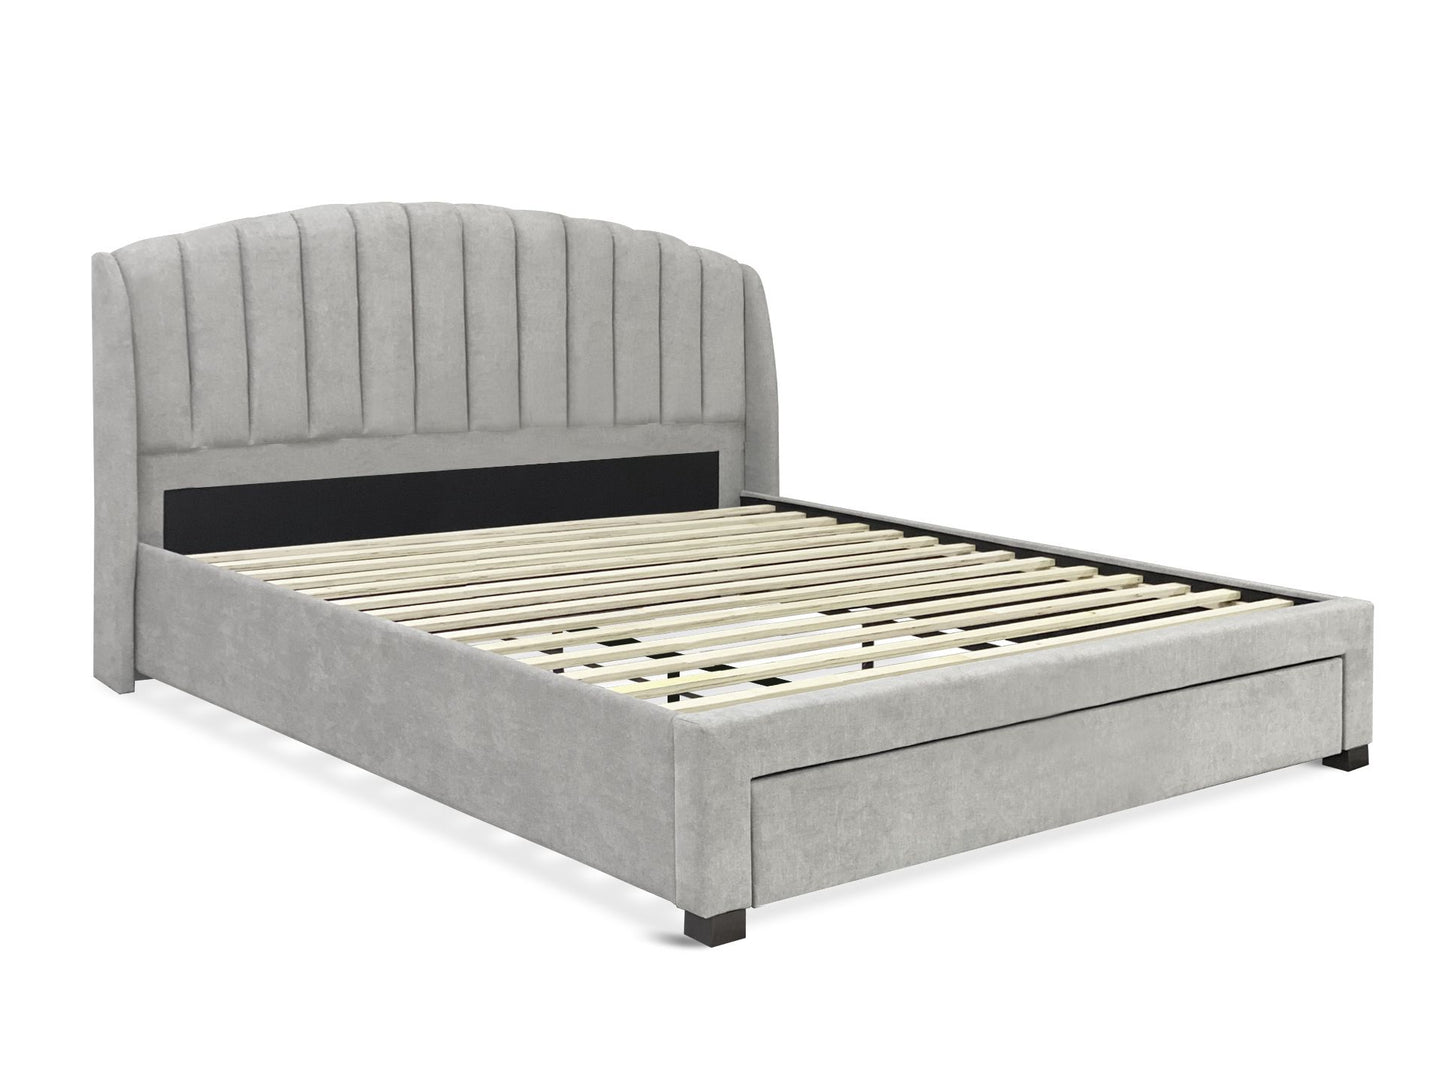 Bary King Bed Frame With Storage - Light Grey